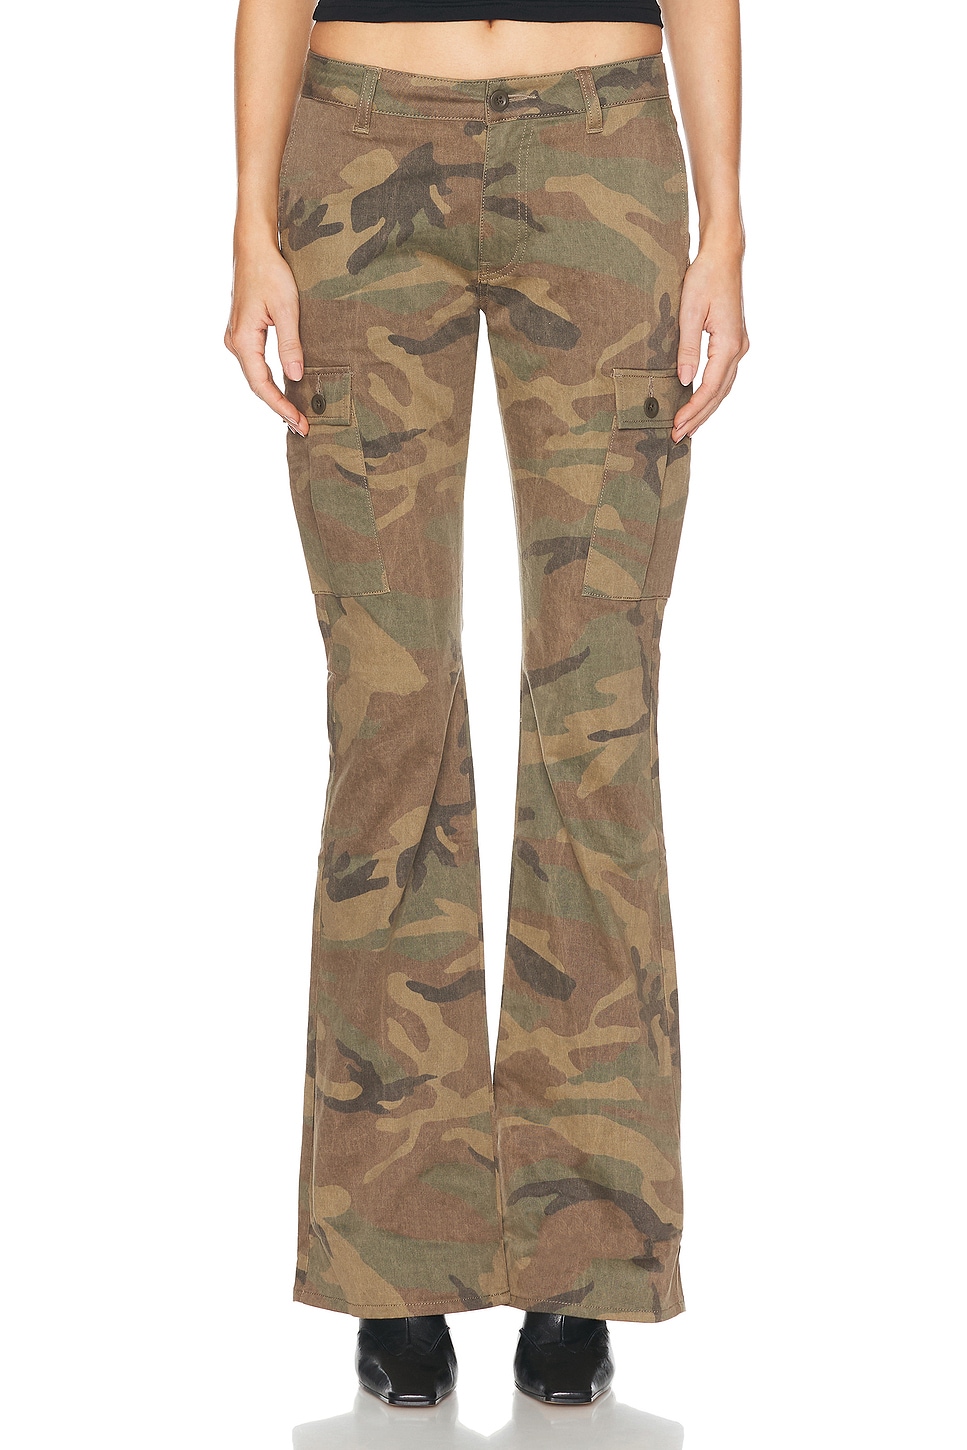 Riley Low Rise Utility Boot Pant in Army